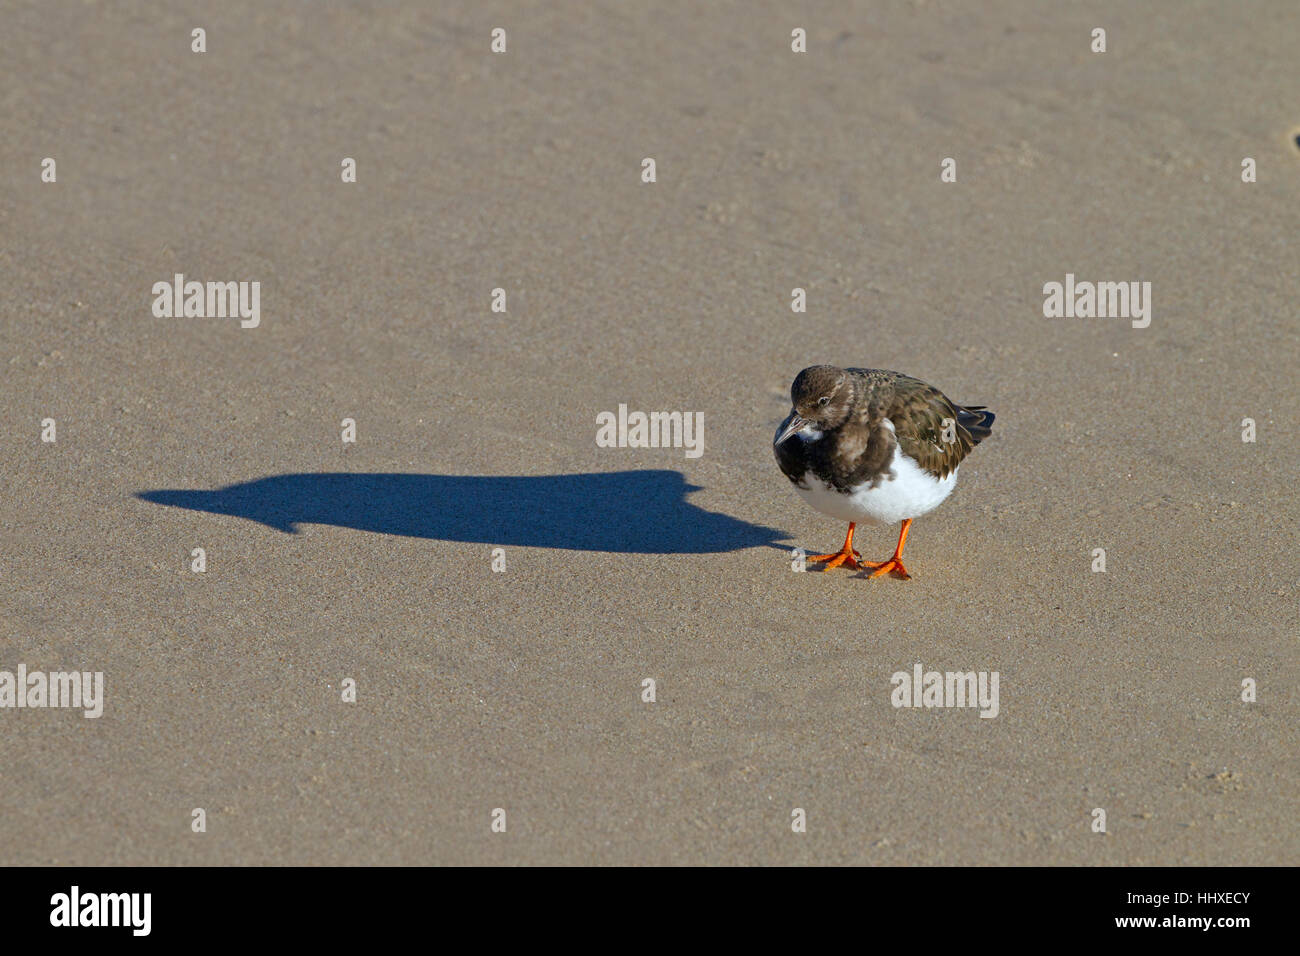 Turnstone Arenaria interpres running on tideline with shadow Stock Photo